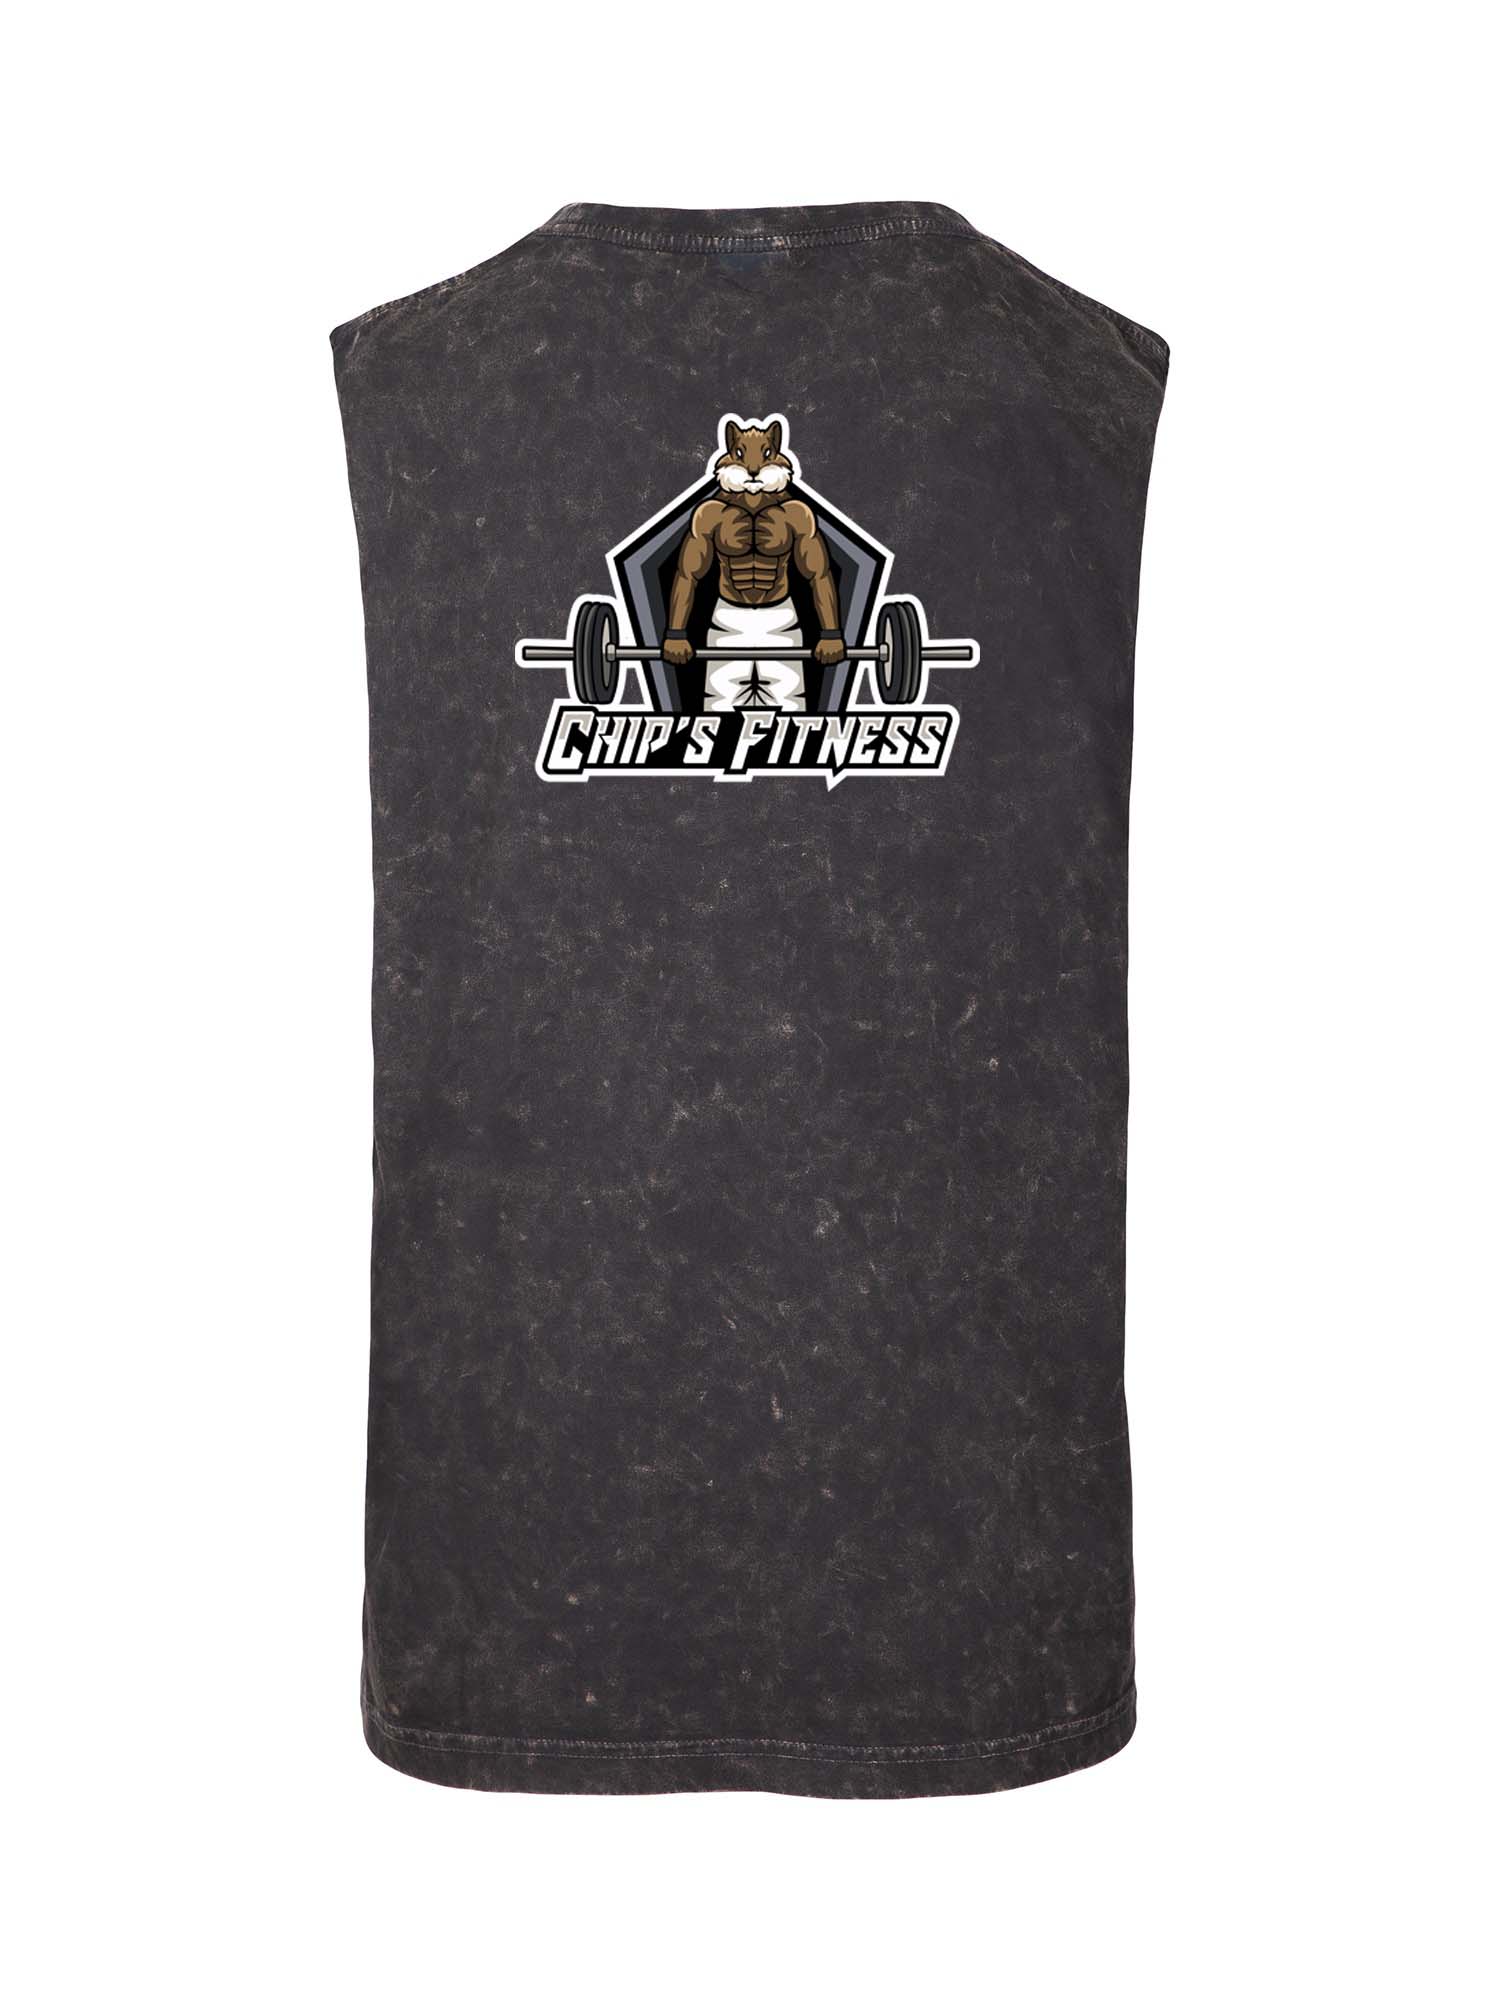 Chip's Fitness Logo Muscle T stone wash double sided